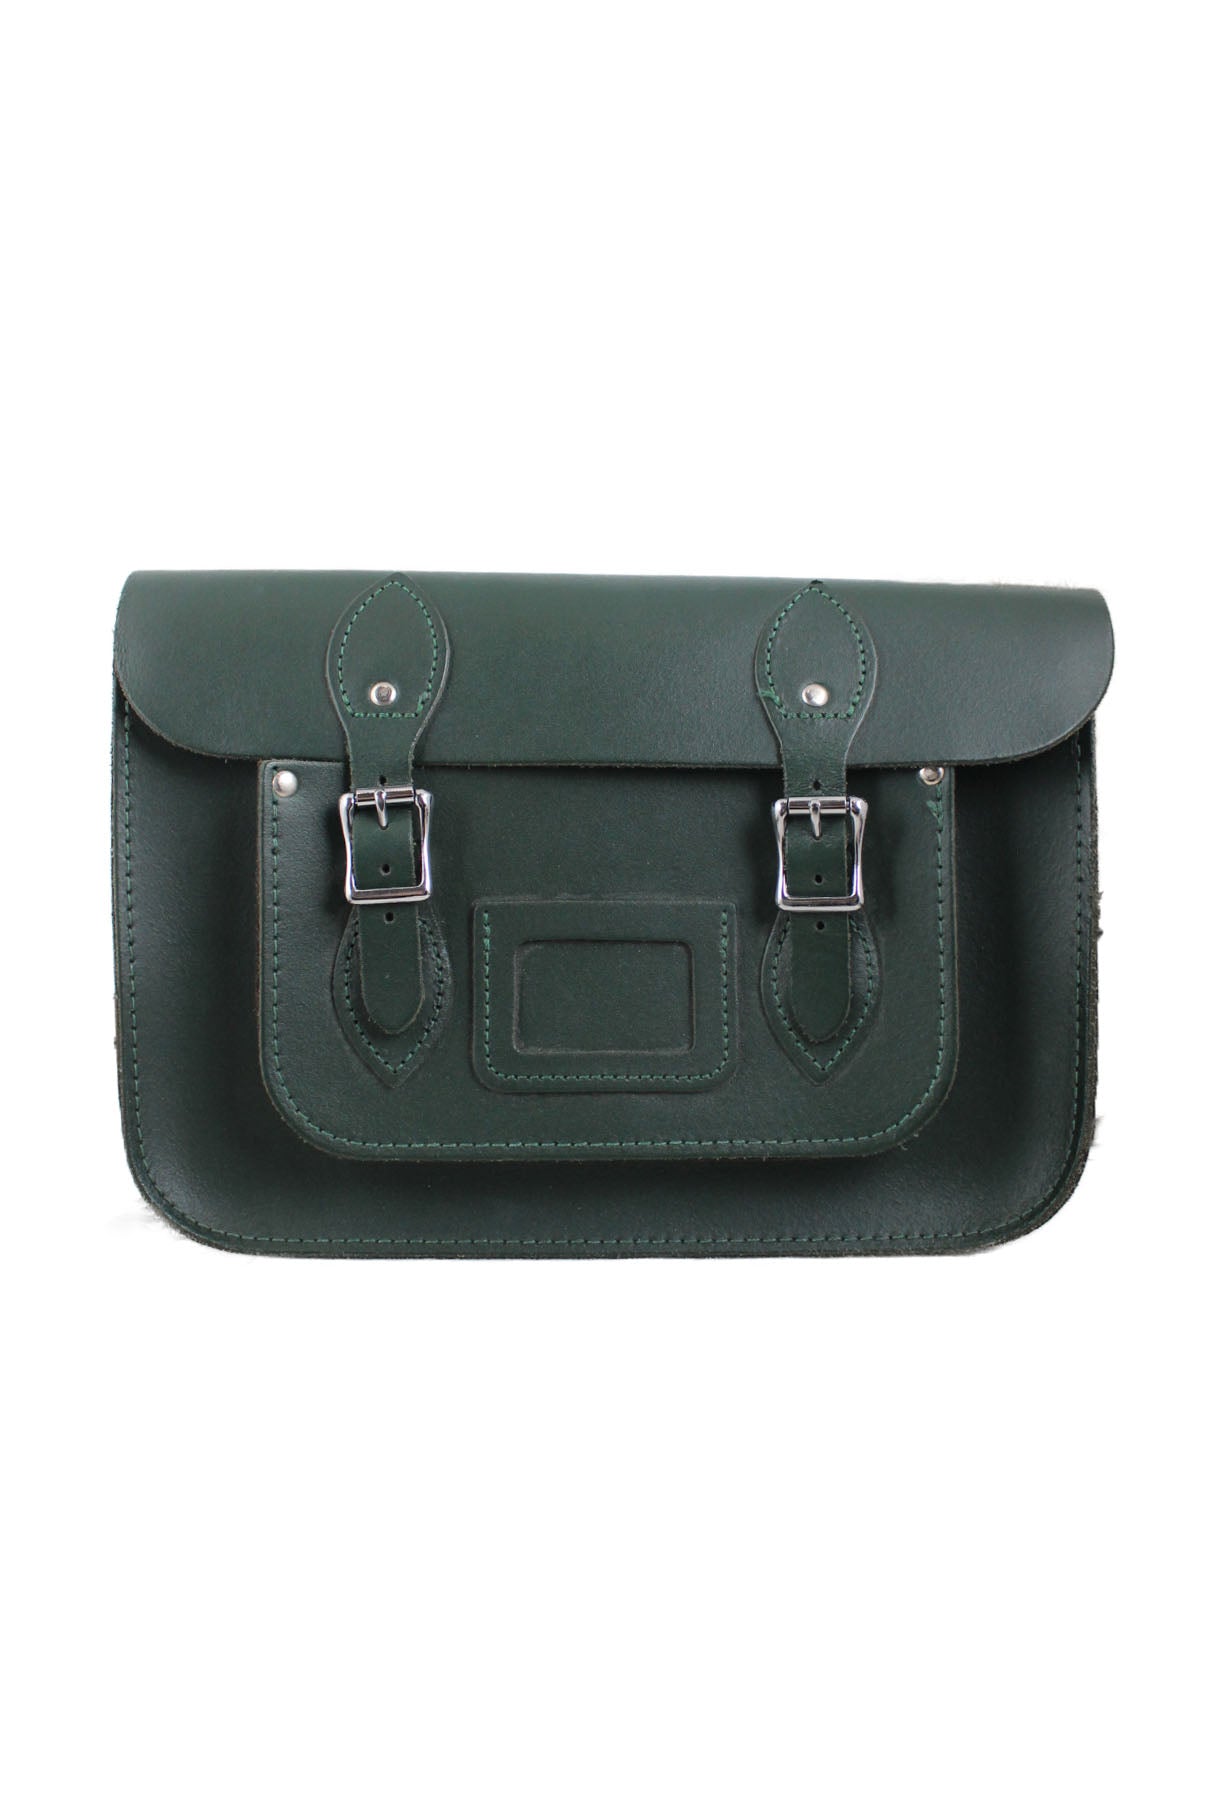 front of the leather satchel co. dark green leather crossbody bag. flap with double buckle closure. front pocket. adjustable shoulder strap.